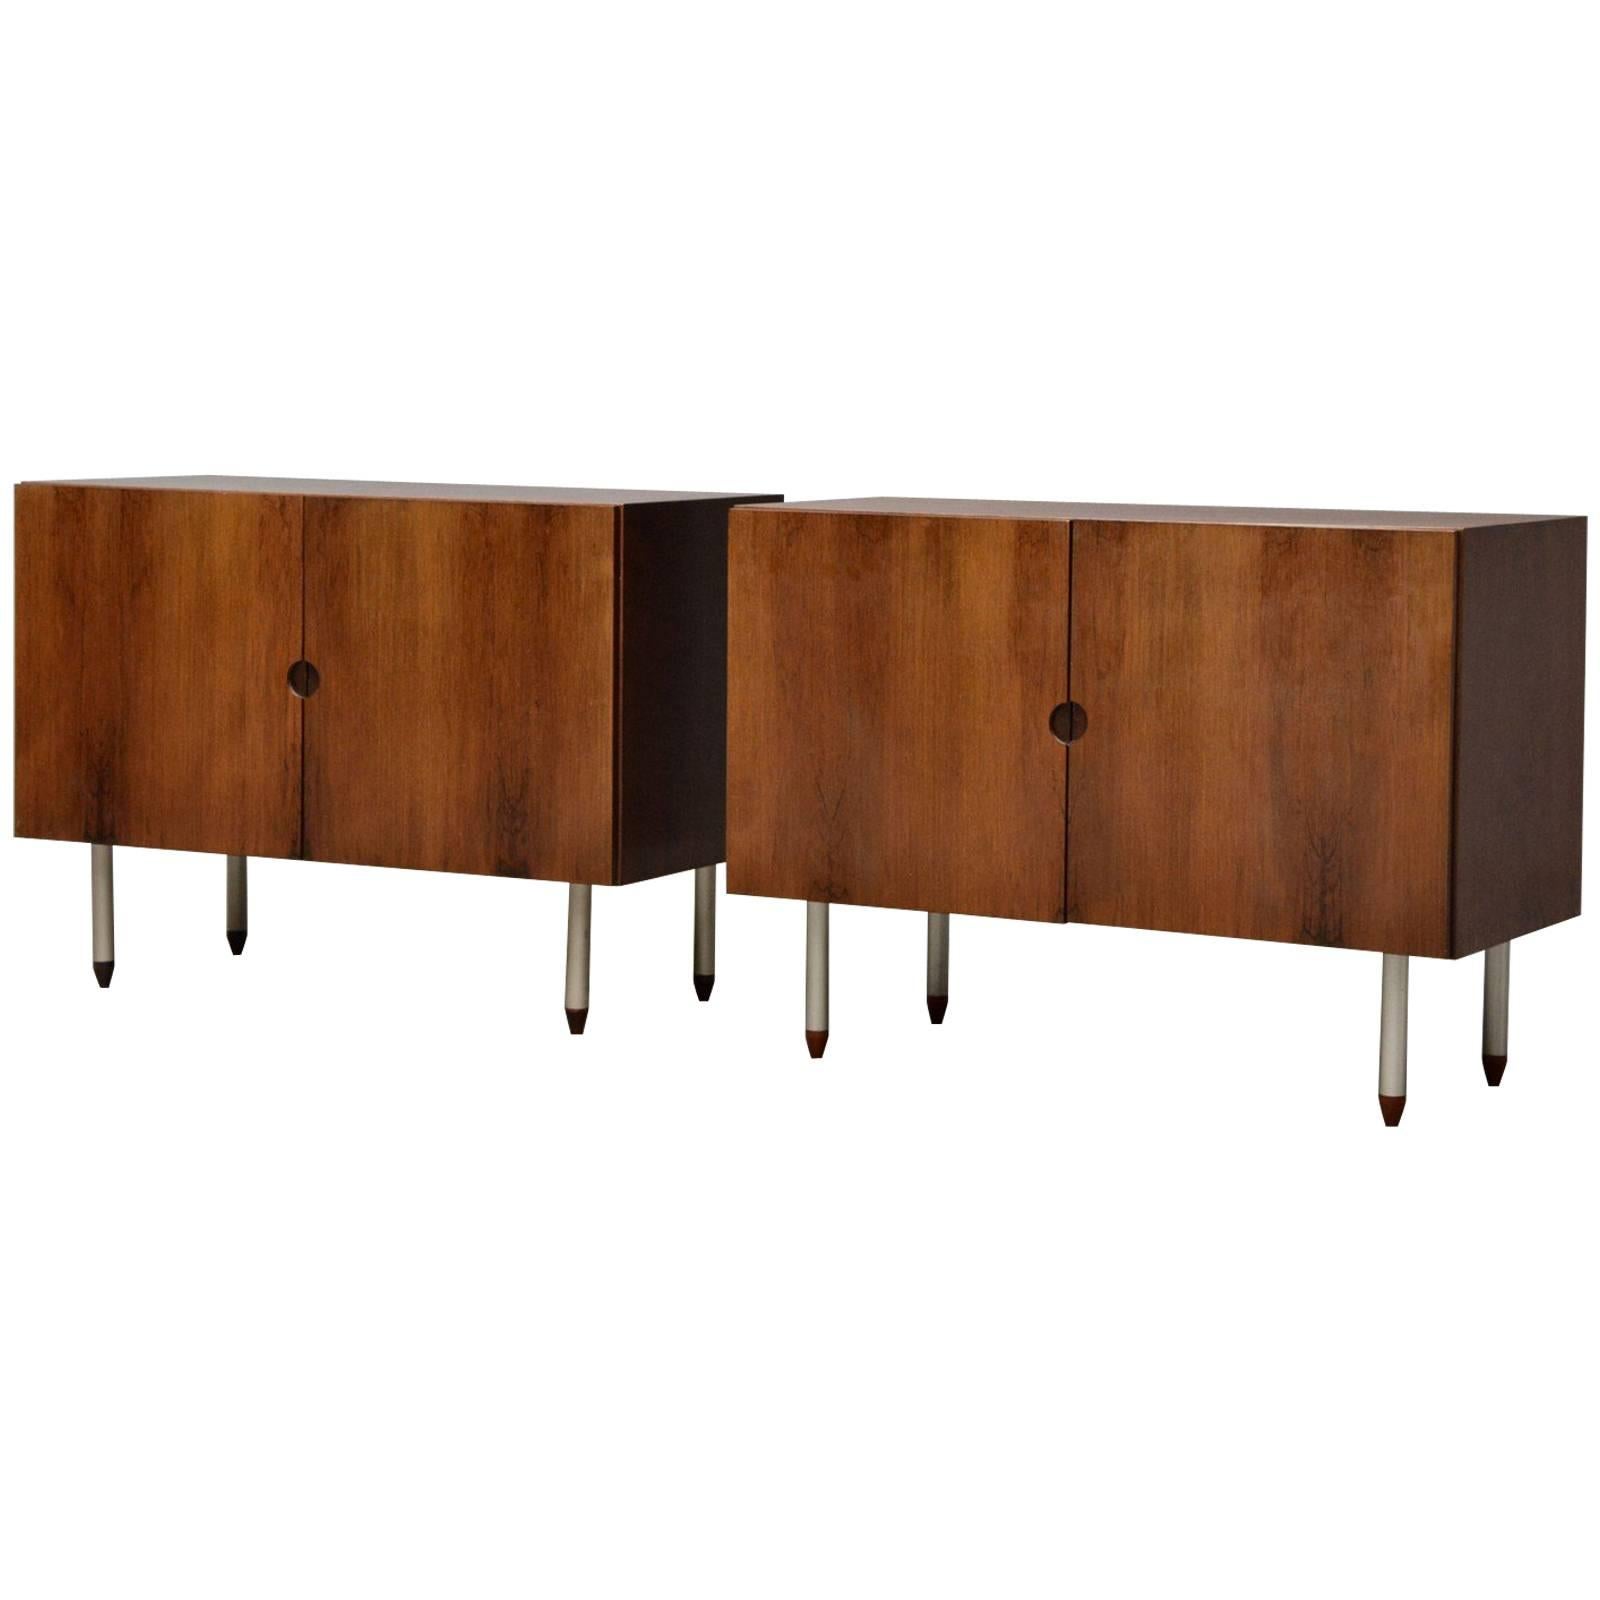 Pair of Low Sideboards For Sale